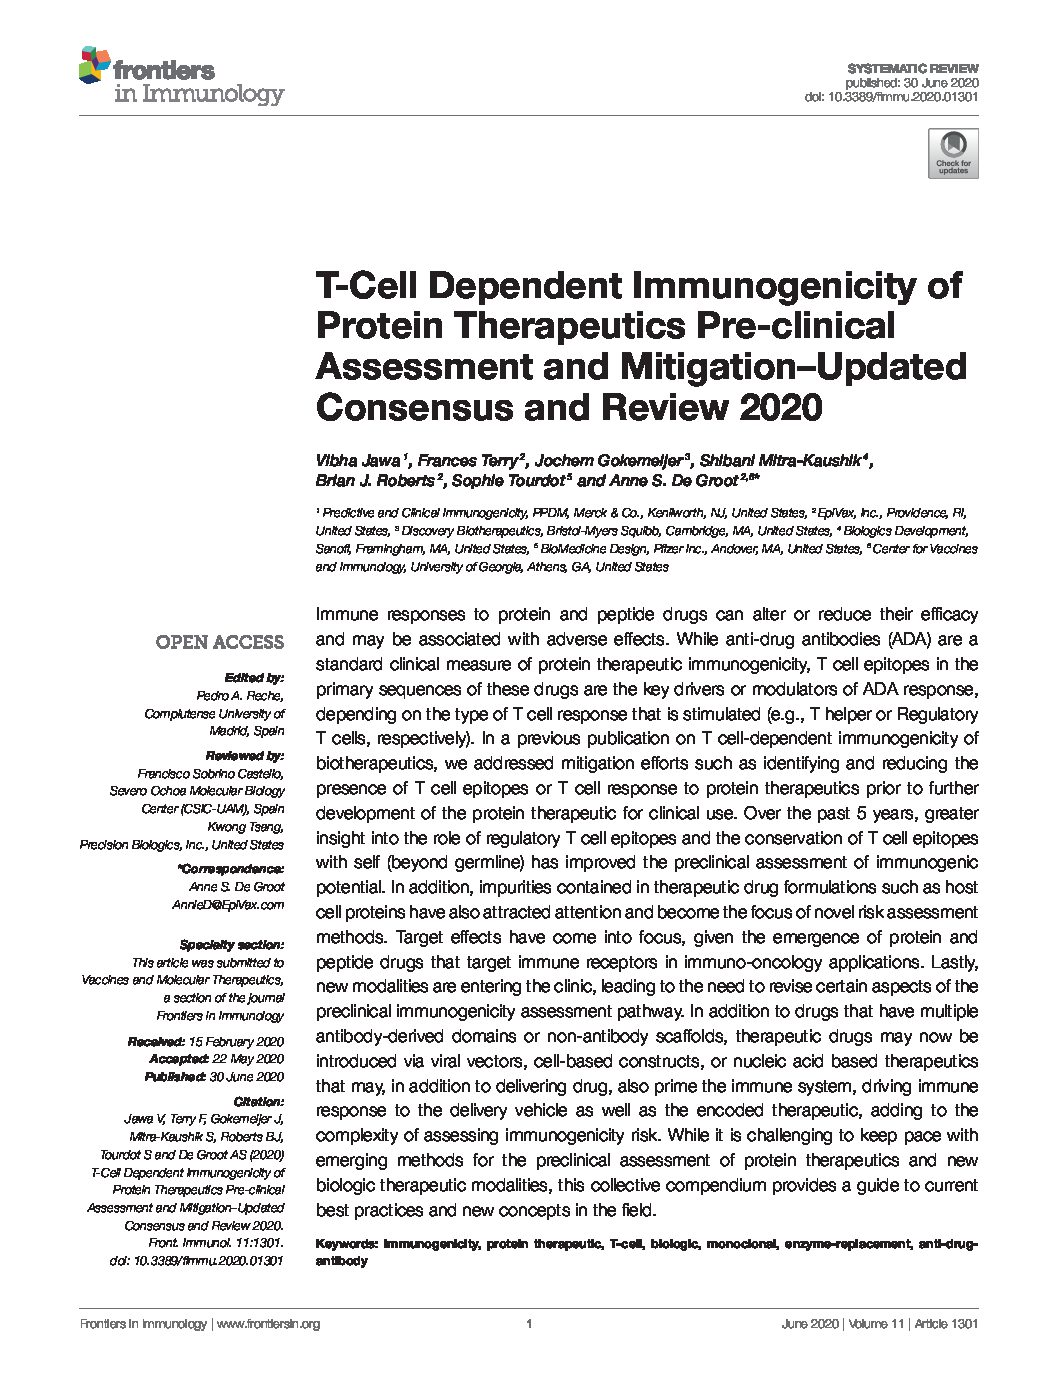 T-Cell Dependent Immunogenicity of Protein Therapeutics Pre-clinical Assessment and Mitigation–Updated Consensus and Review 2020